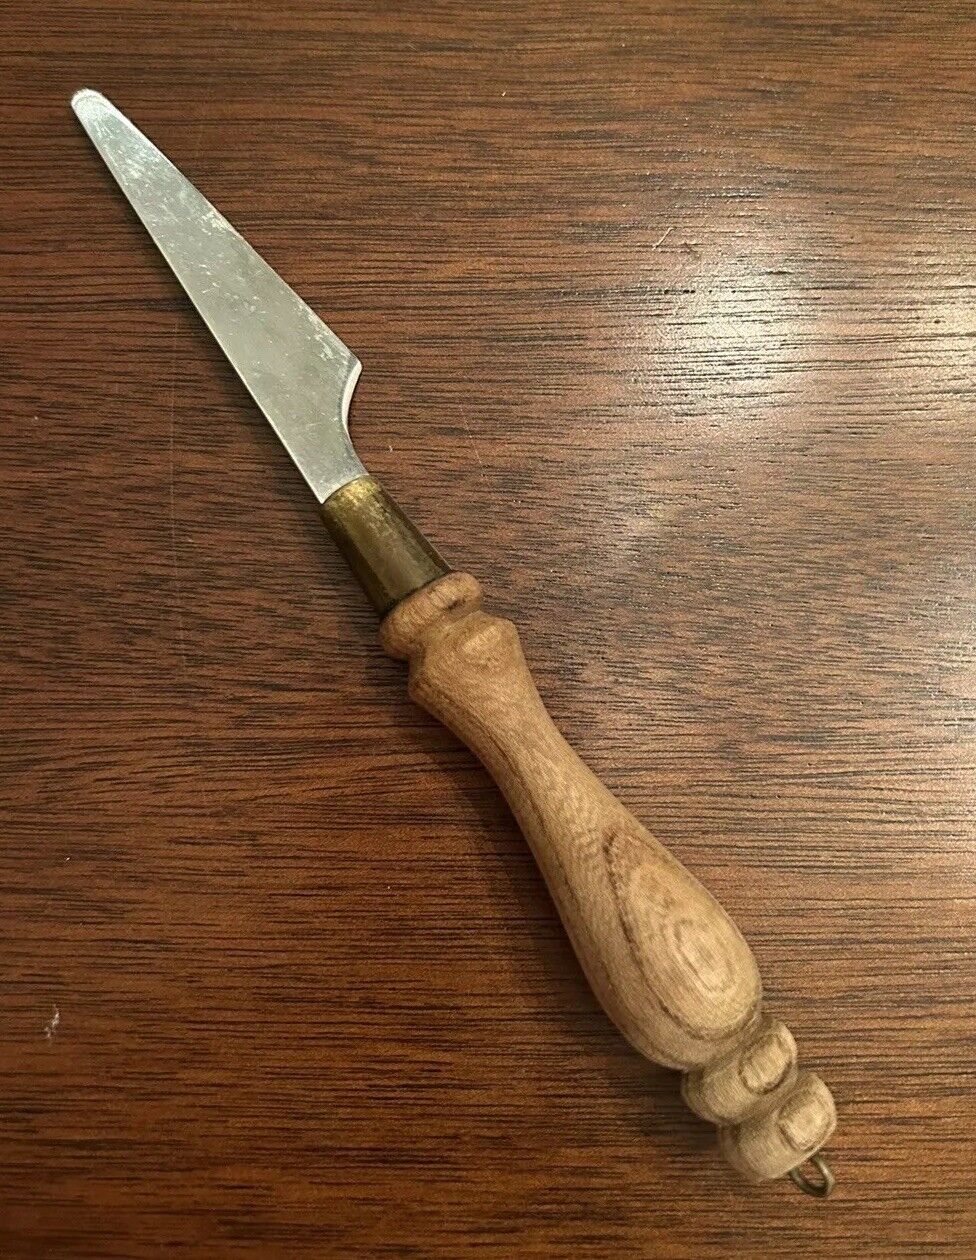 Vintage Stainless Steel Japan Paring Knife, VERY RARE UNIQUE HANDLE